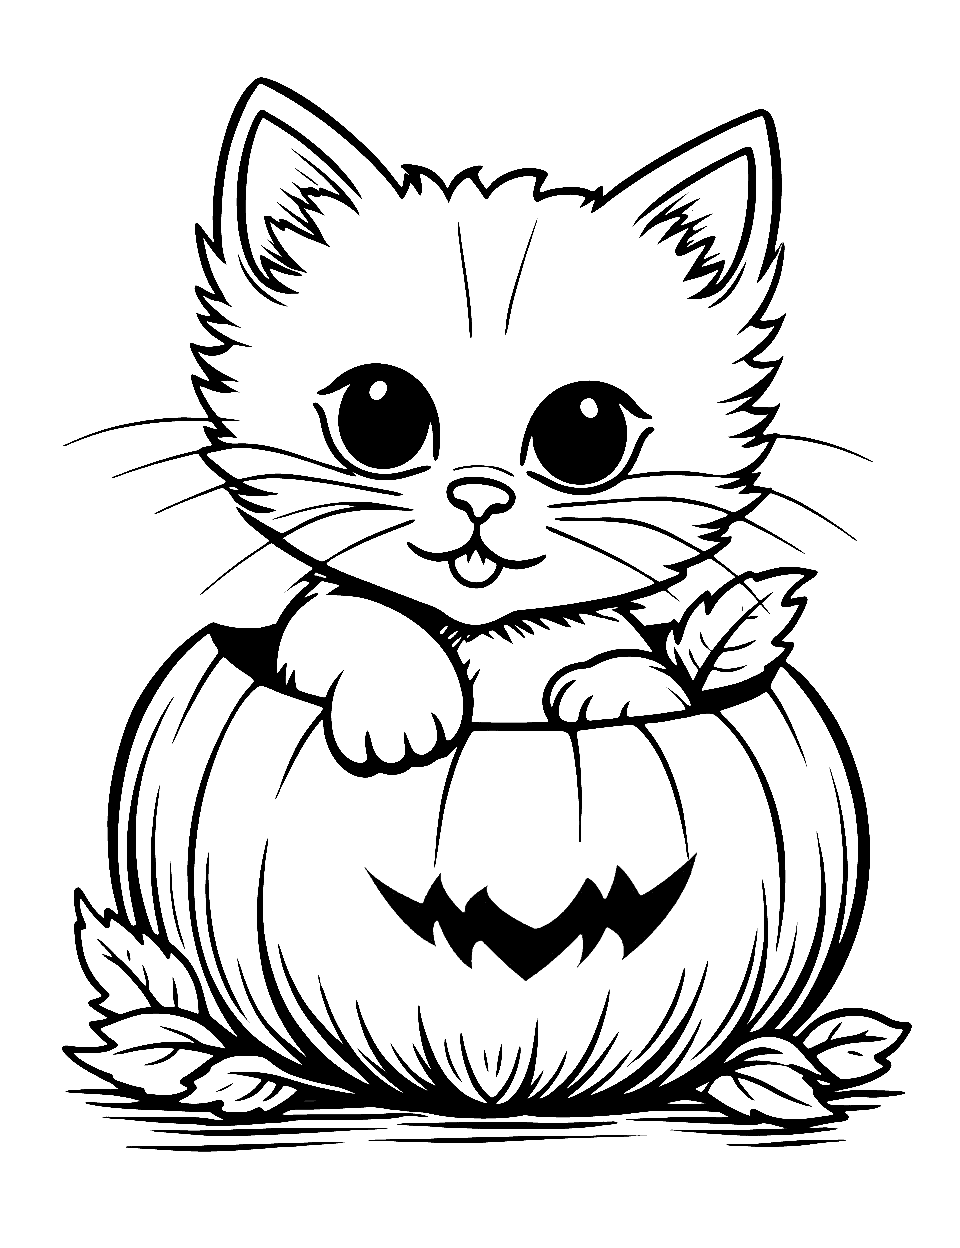 Halloween Kitten Surprise Coloring Page - A kitten peeking out from a carved pumpkin.